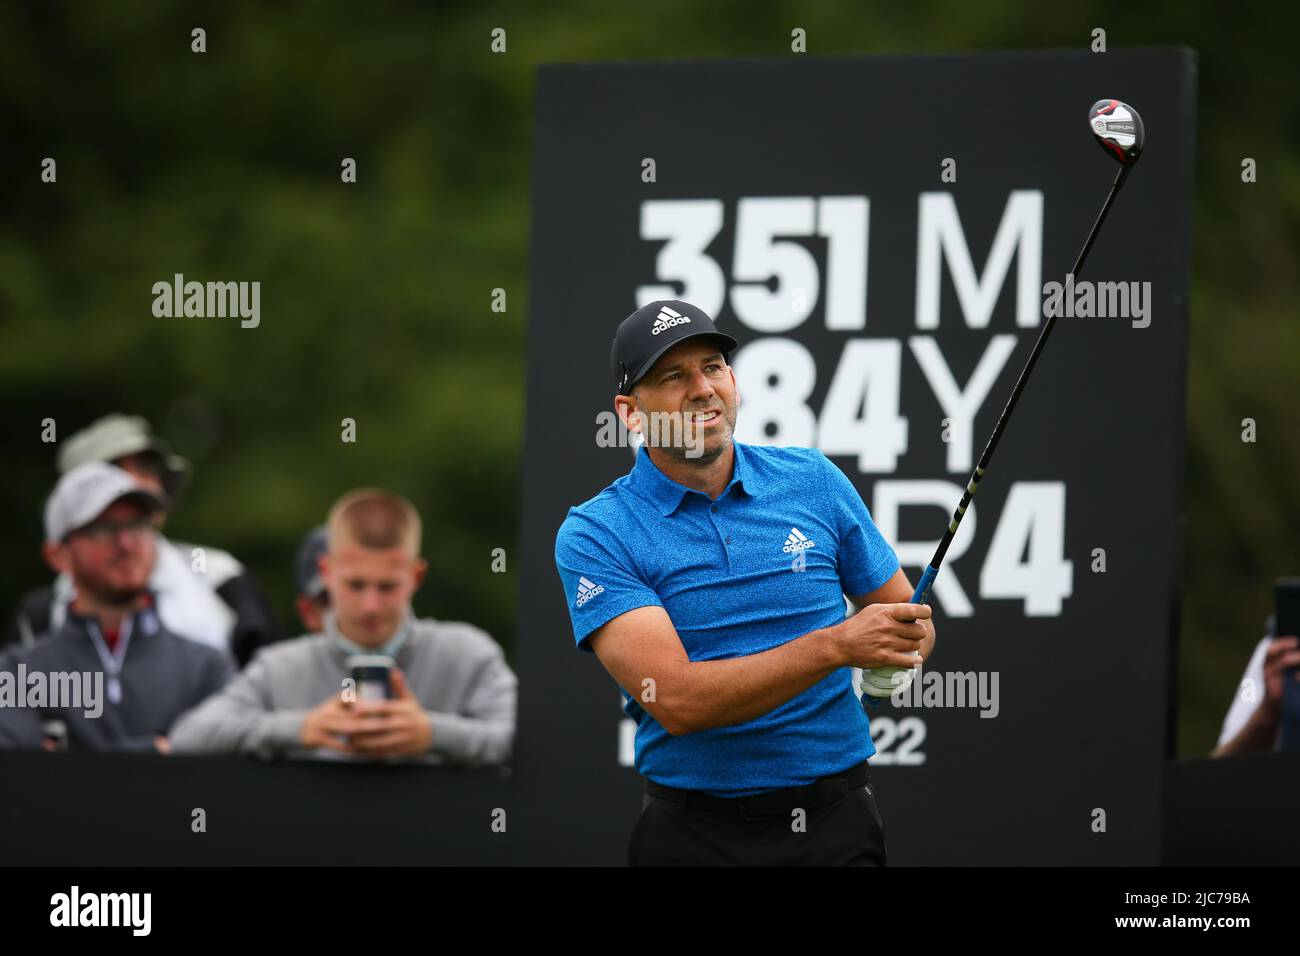 ST ALBANS, ENGLAND - JUNE 09: Sergio Garcia of Spain tees off on the 10th hole during day one of the LIV Golf Invitational at The Centurion Club on June 9, 2022 in St Albans, England. (MB Media) Stock Photo